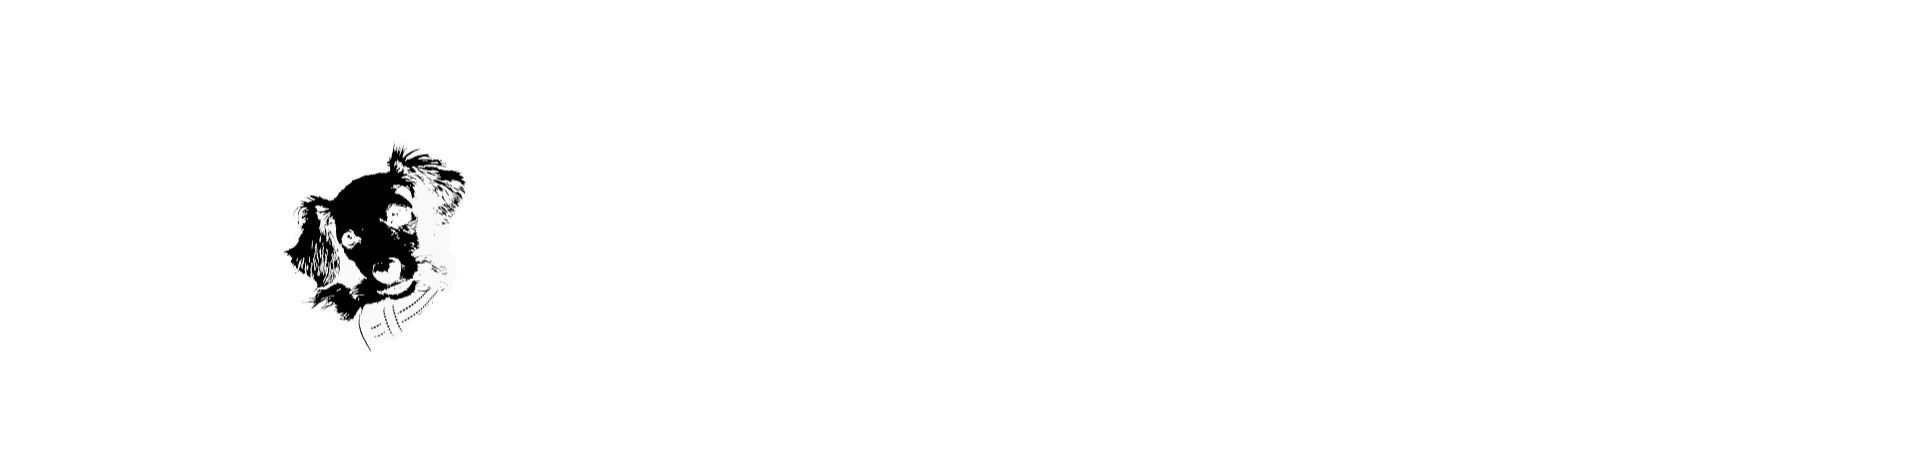 RJ Tax Consulting